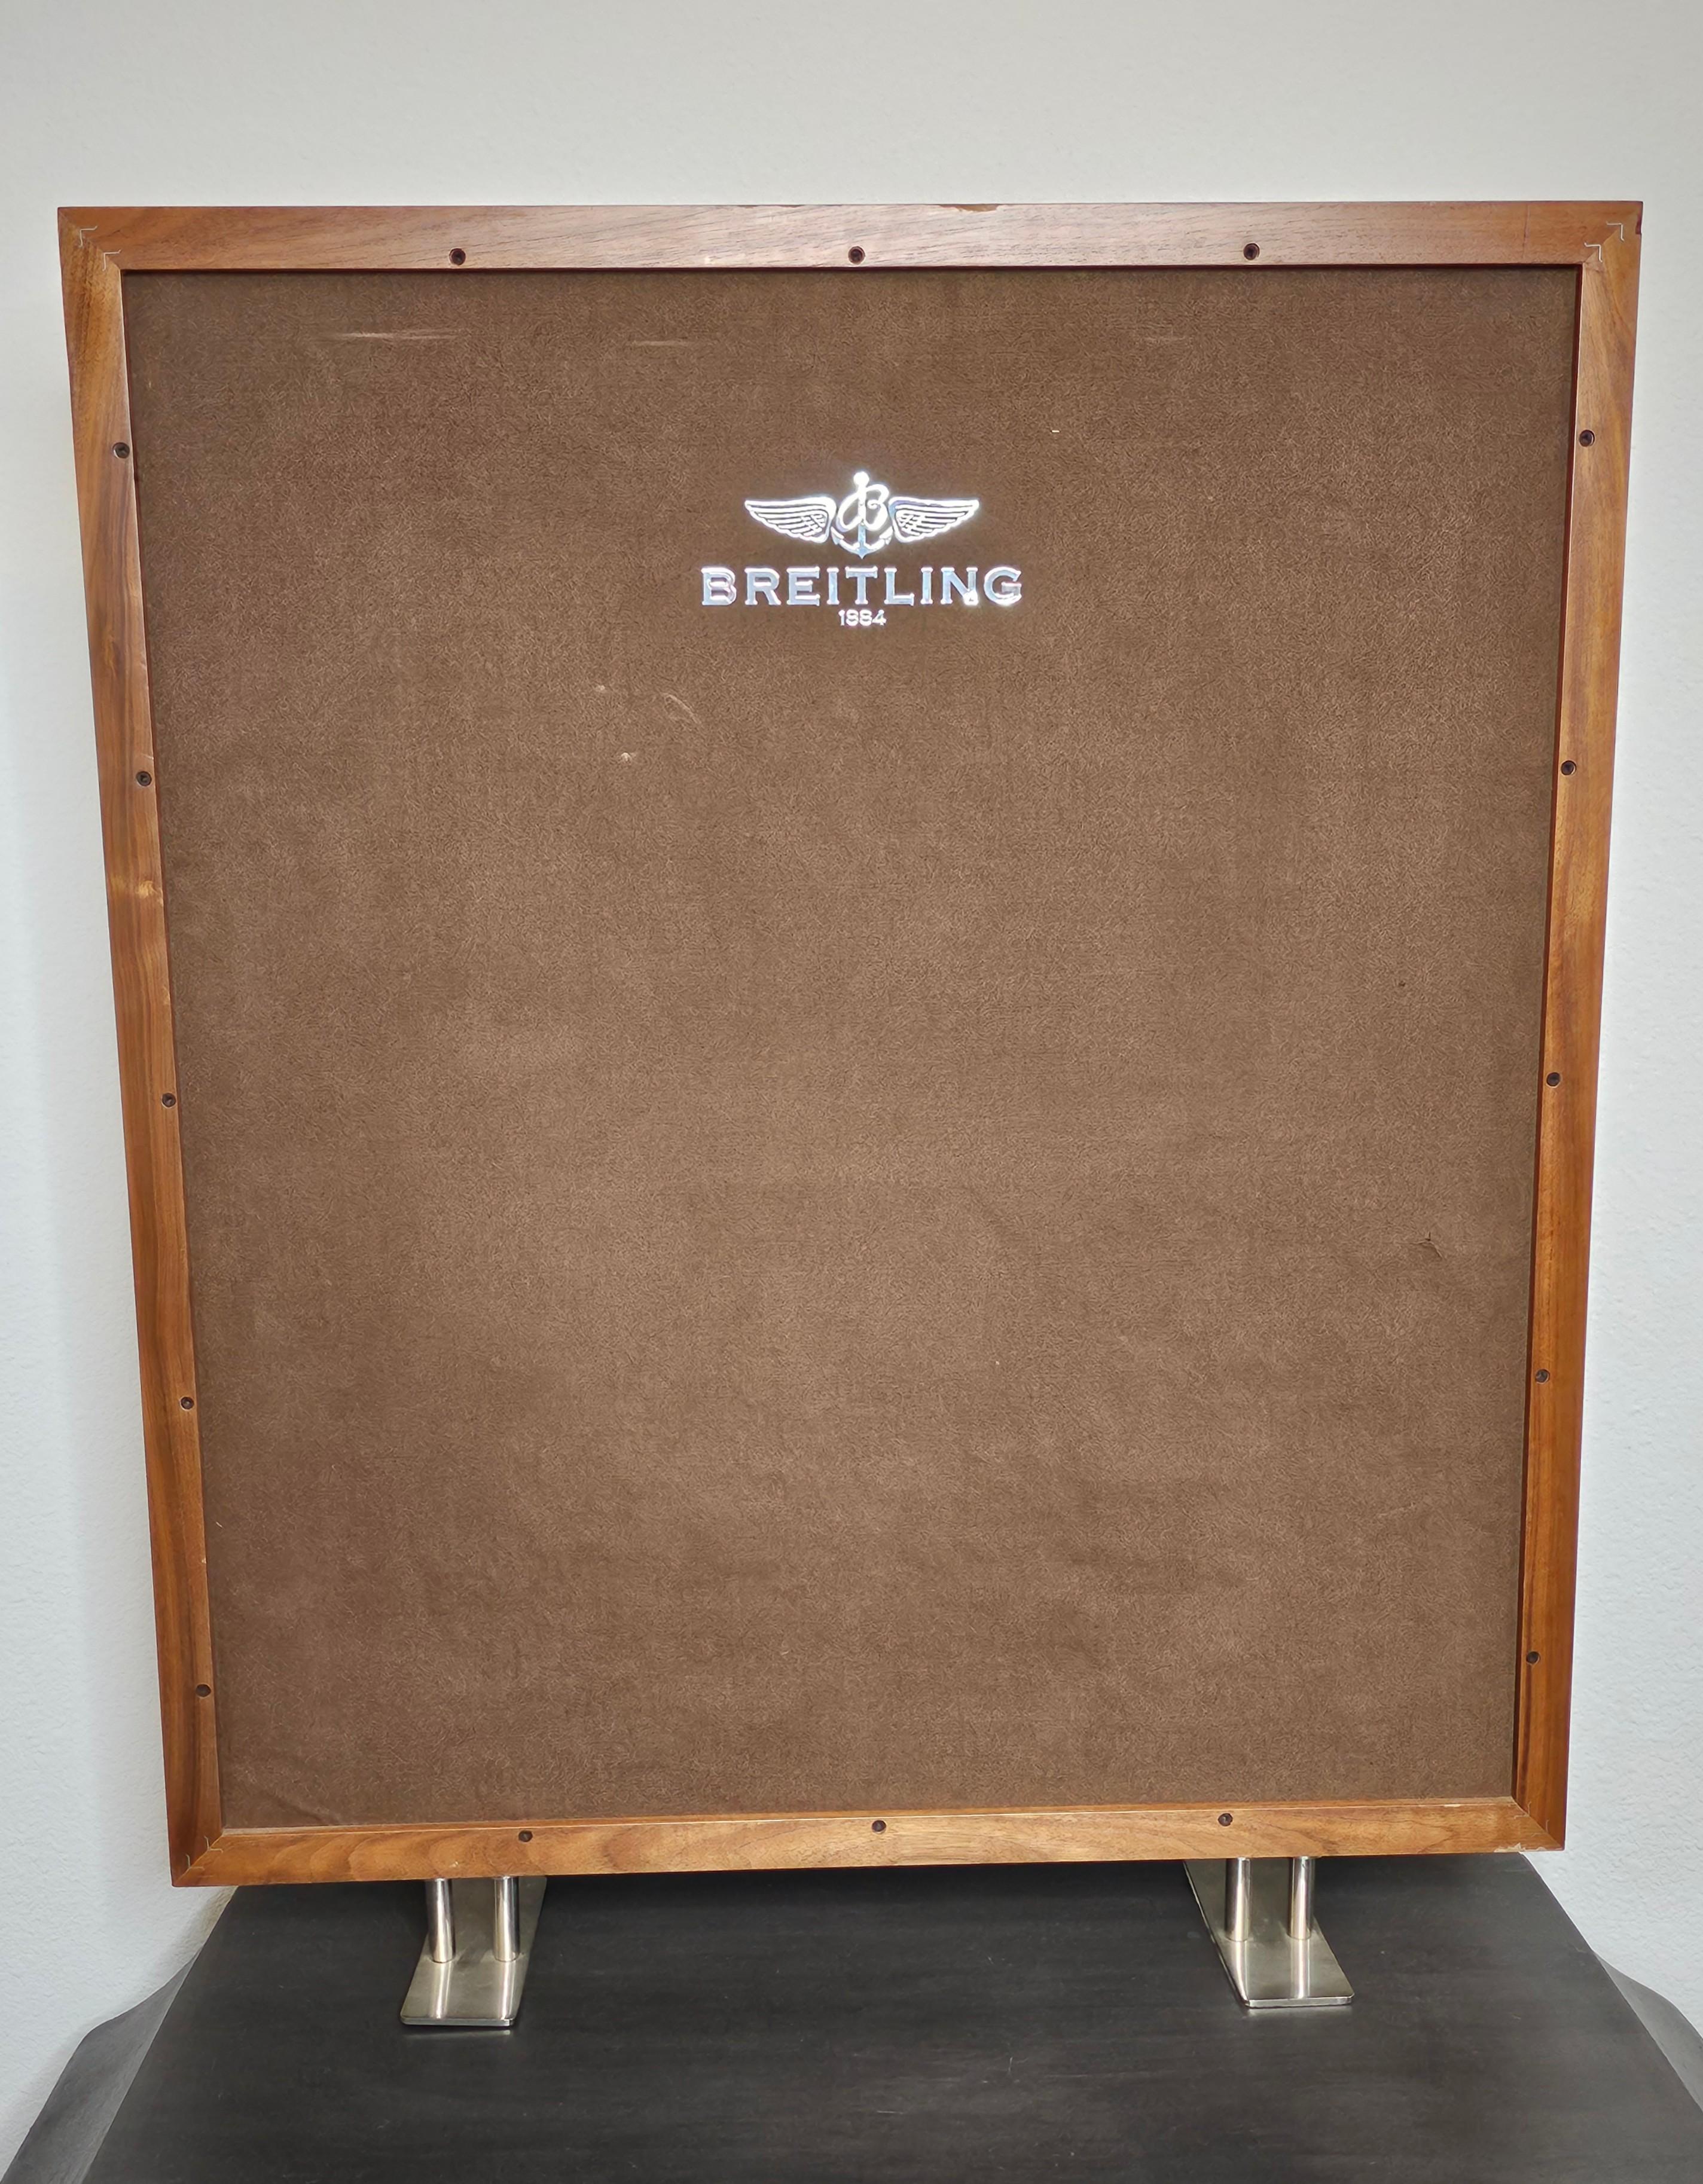 Breitling Retail Store Display Advertising Sign  For Sale 9